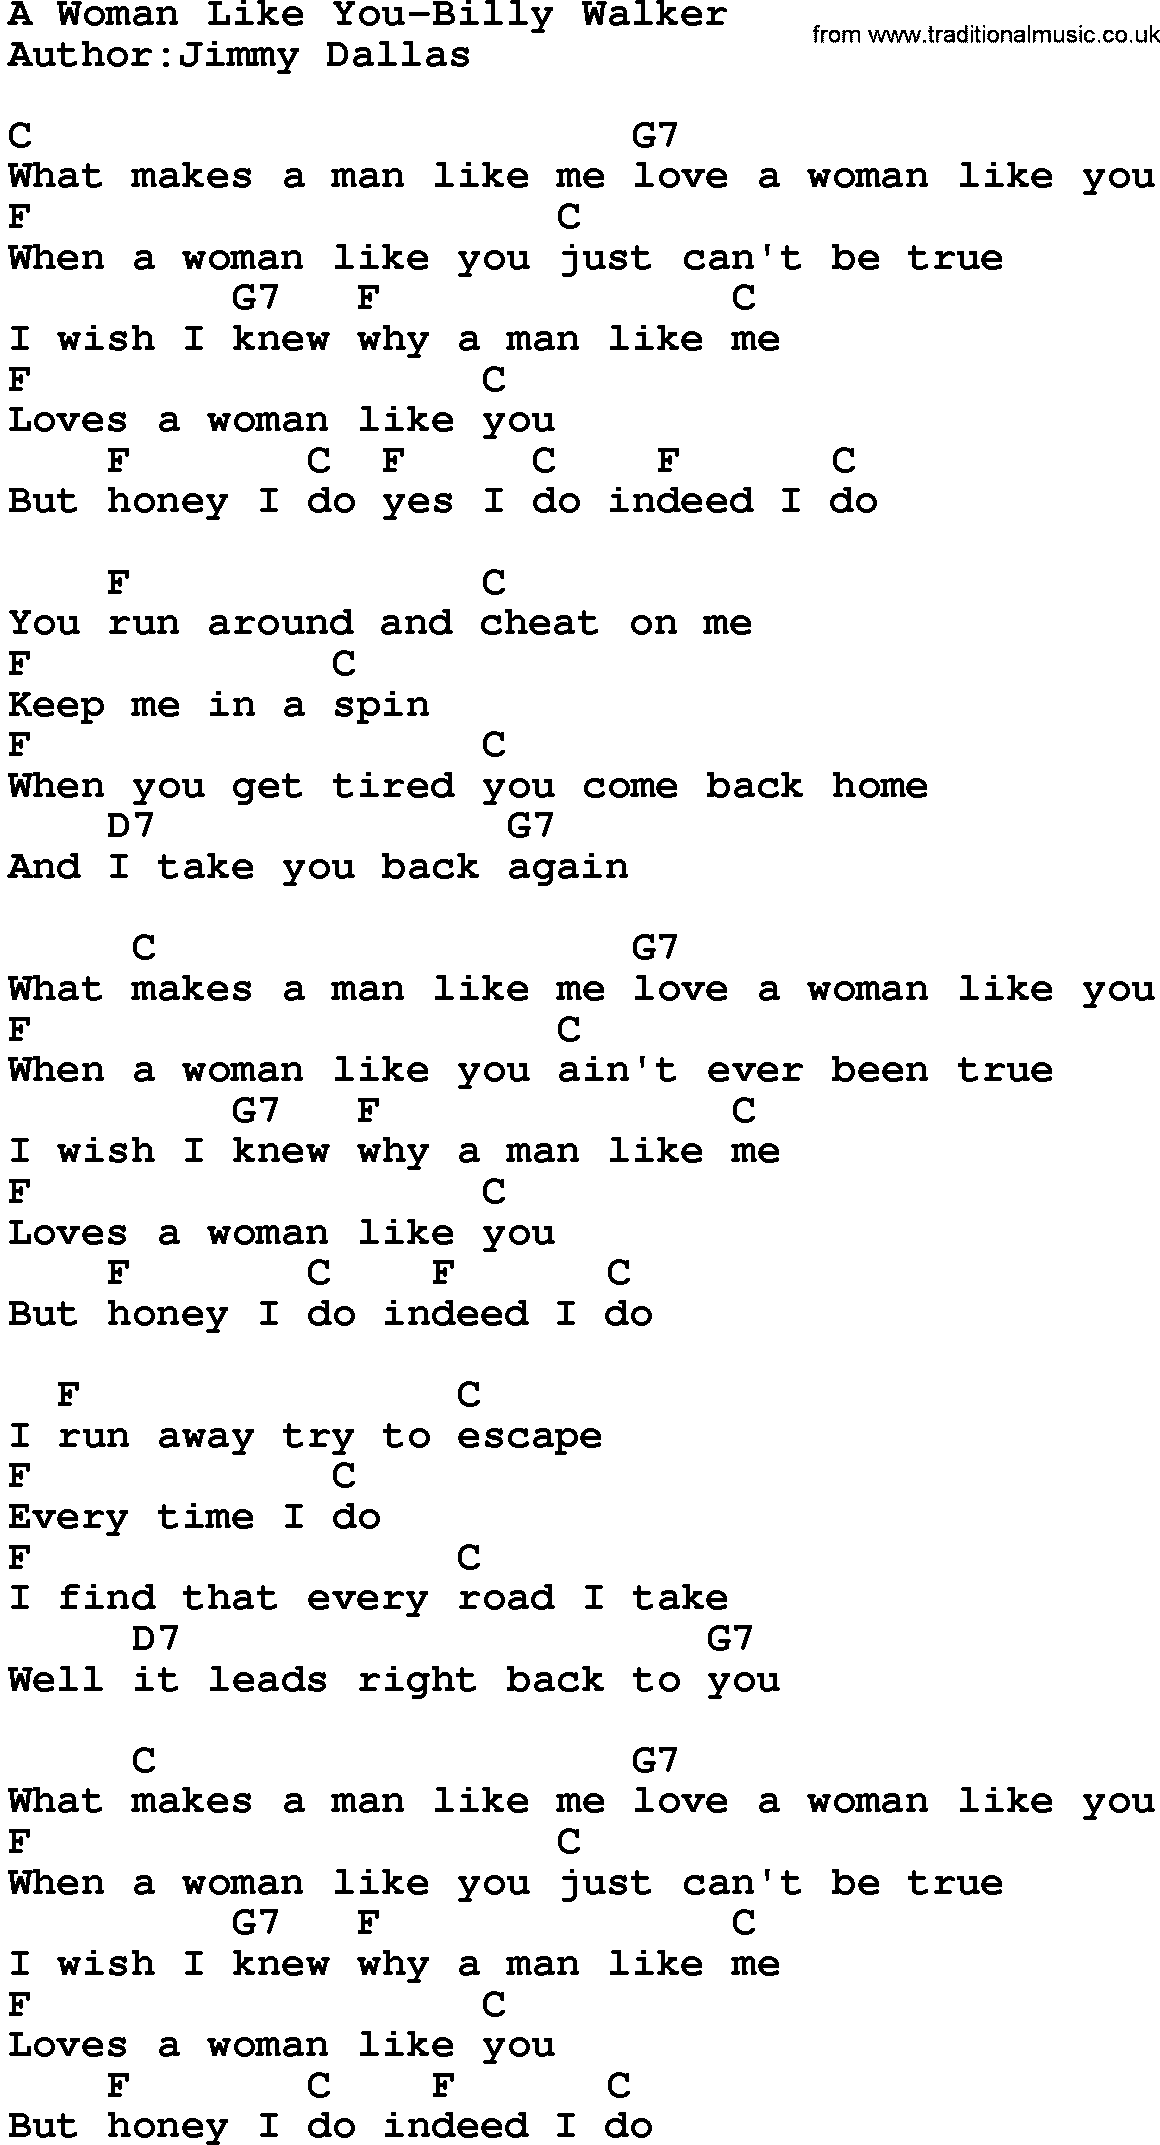 Country music song: A Woman Like You-Billy Walker lyrics and chords